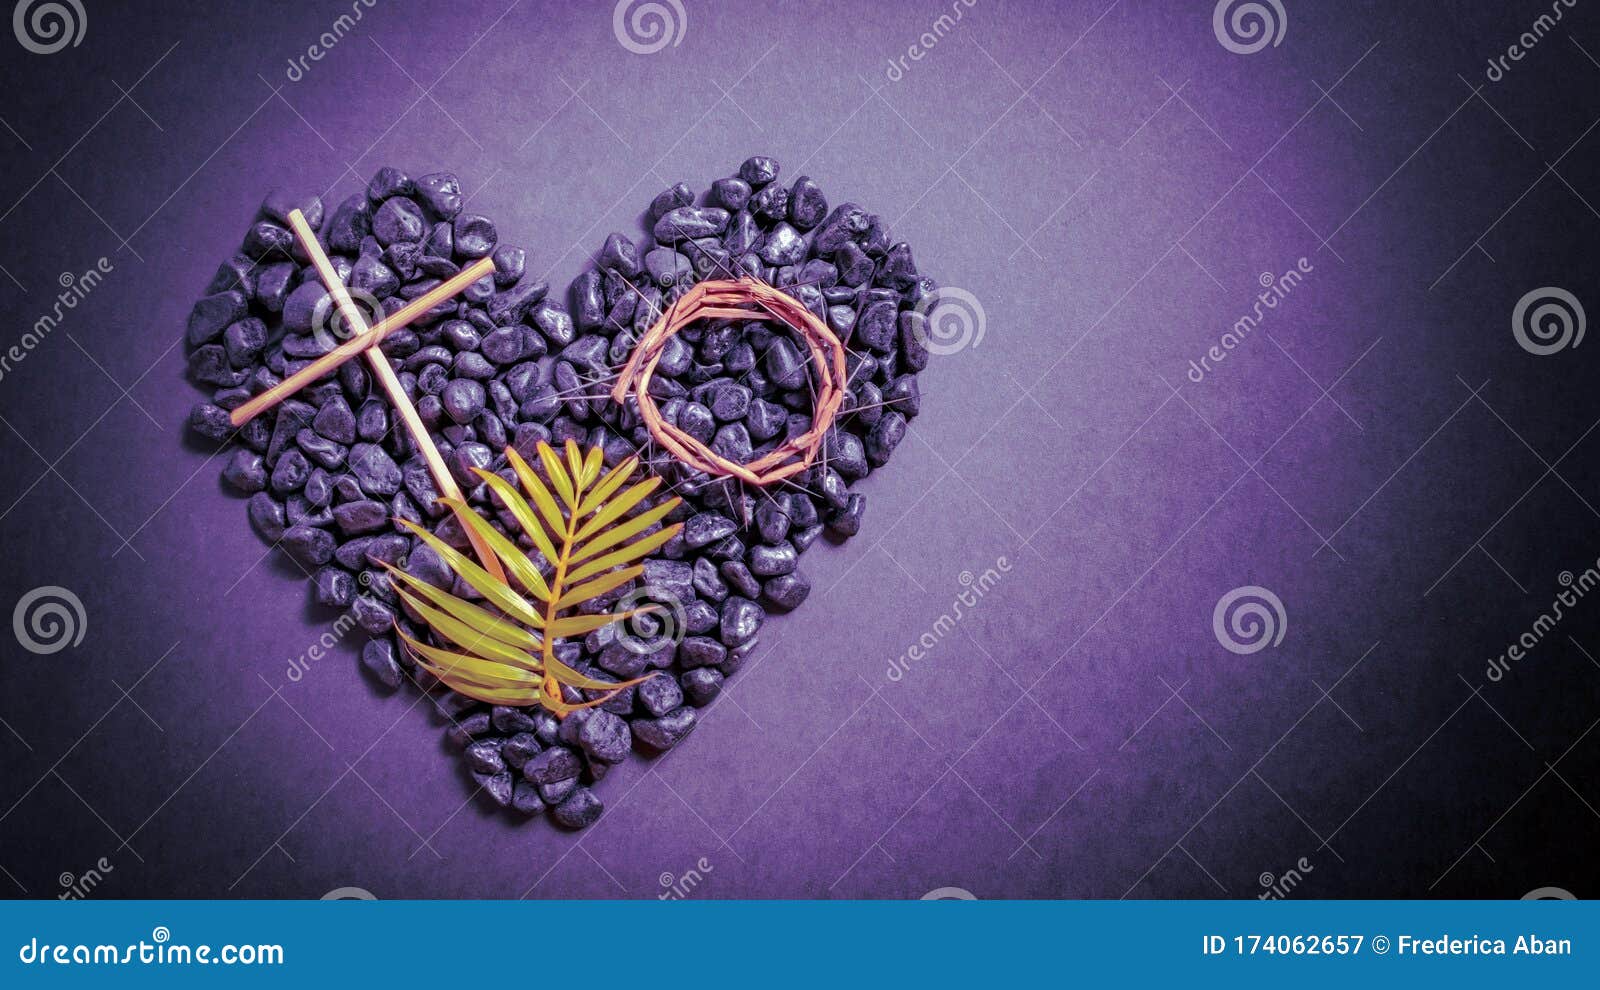 lent season,holy week and good friday  - image of wooden cross, crown of thorns and palm leave on stones in purple vintage